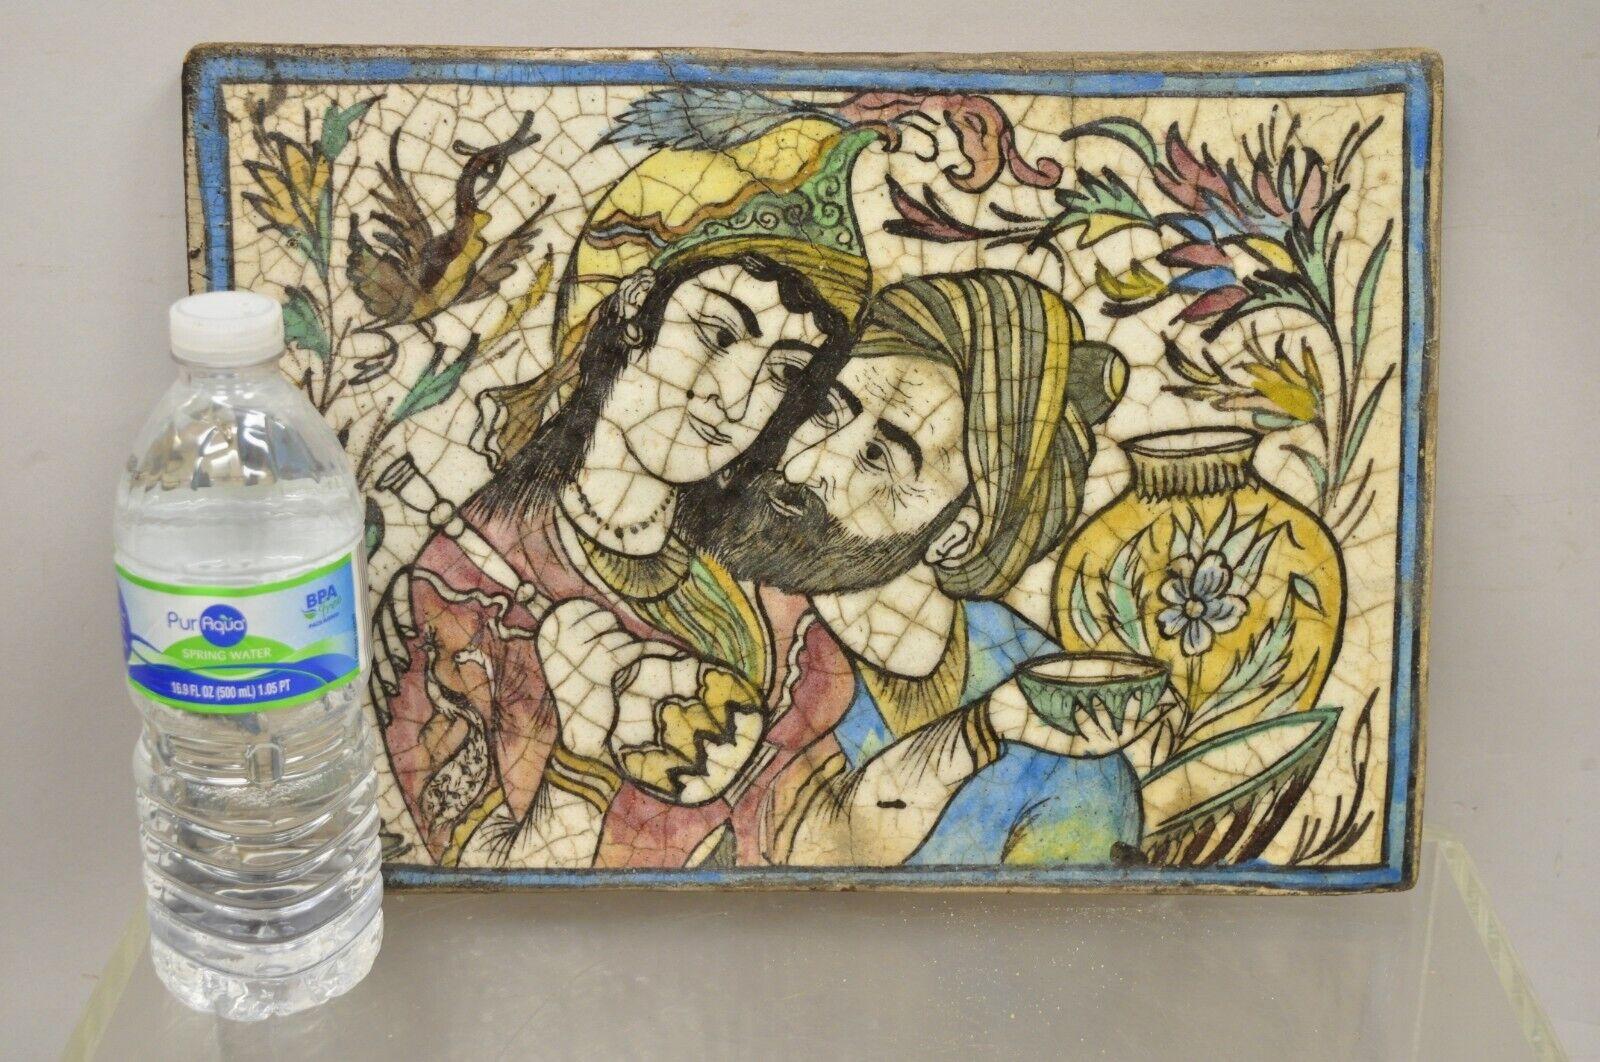 Antique Persian Iznik Qajar Style Ceramic Pottery Horizontal Tile Bearded Man and Woman C2. Item features an original crackle glazed finish, heavy ceramic pottery construction, very impressive detail, wonderful style and form. Great to mount as wall